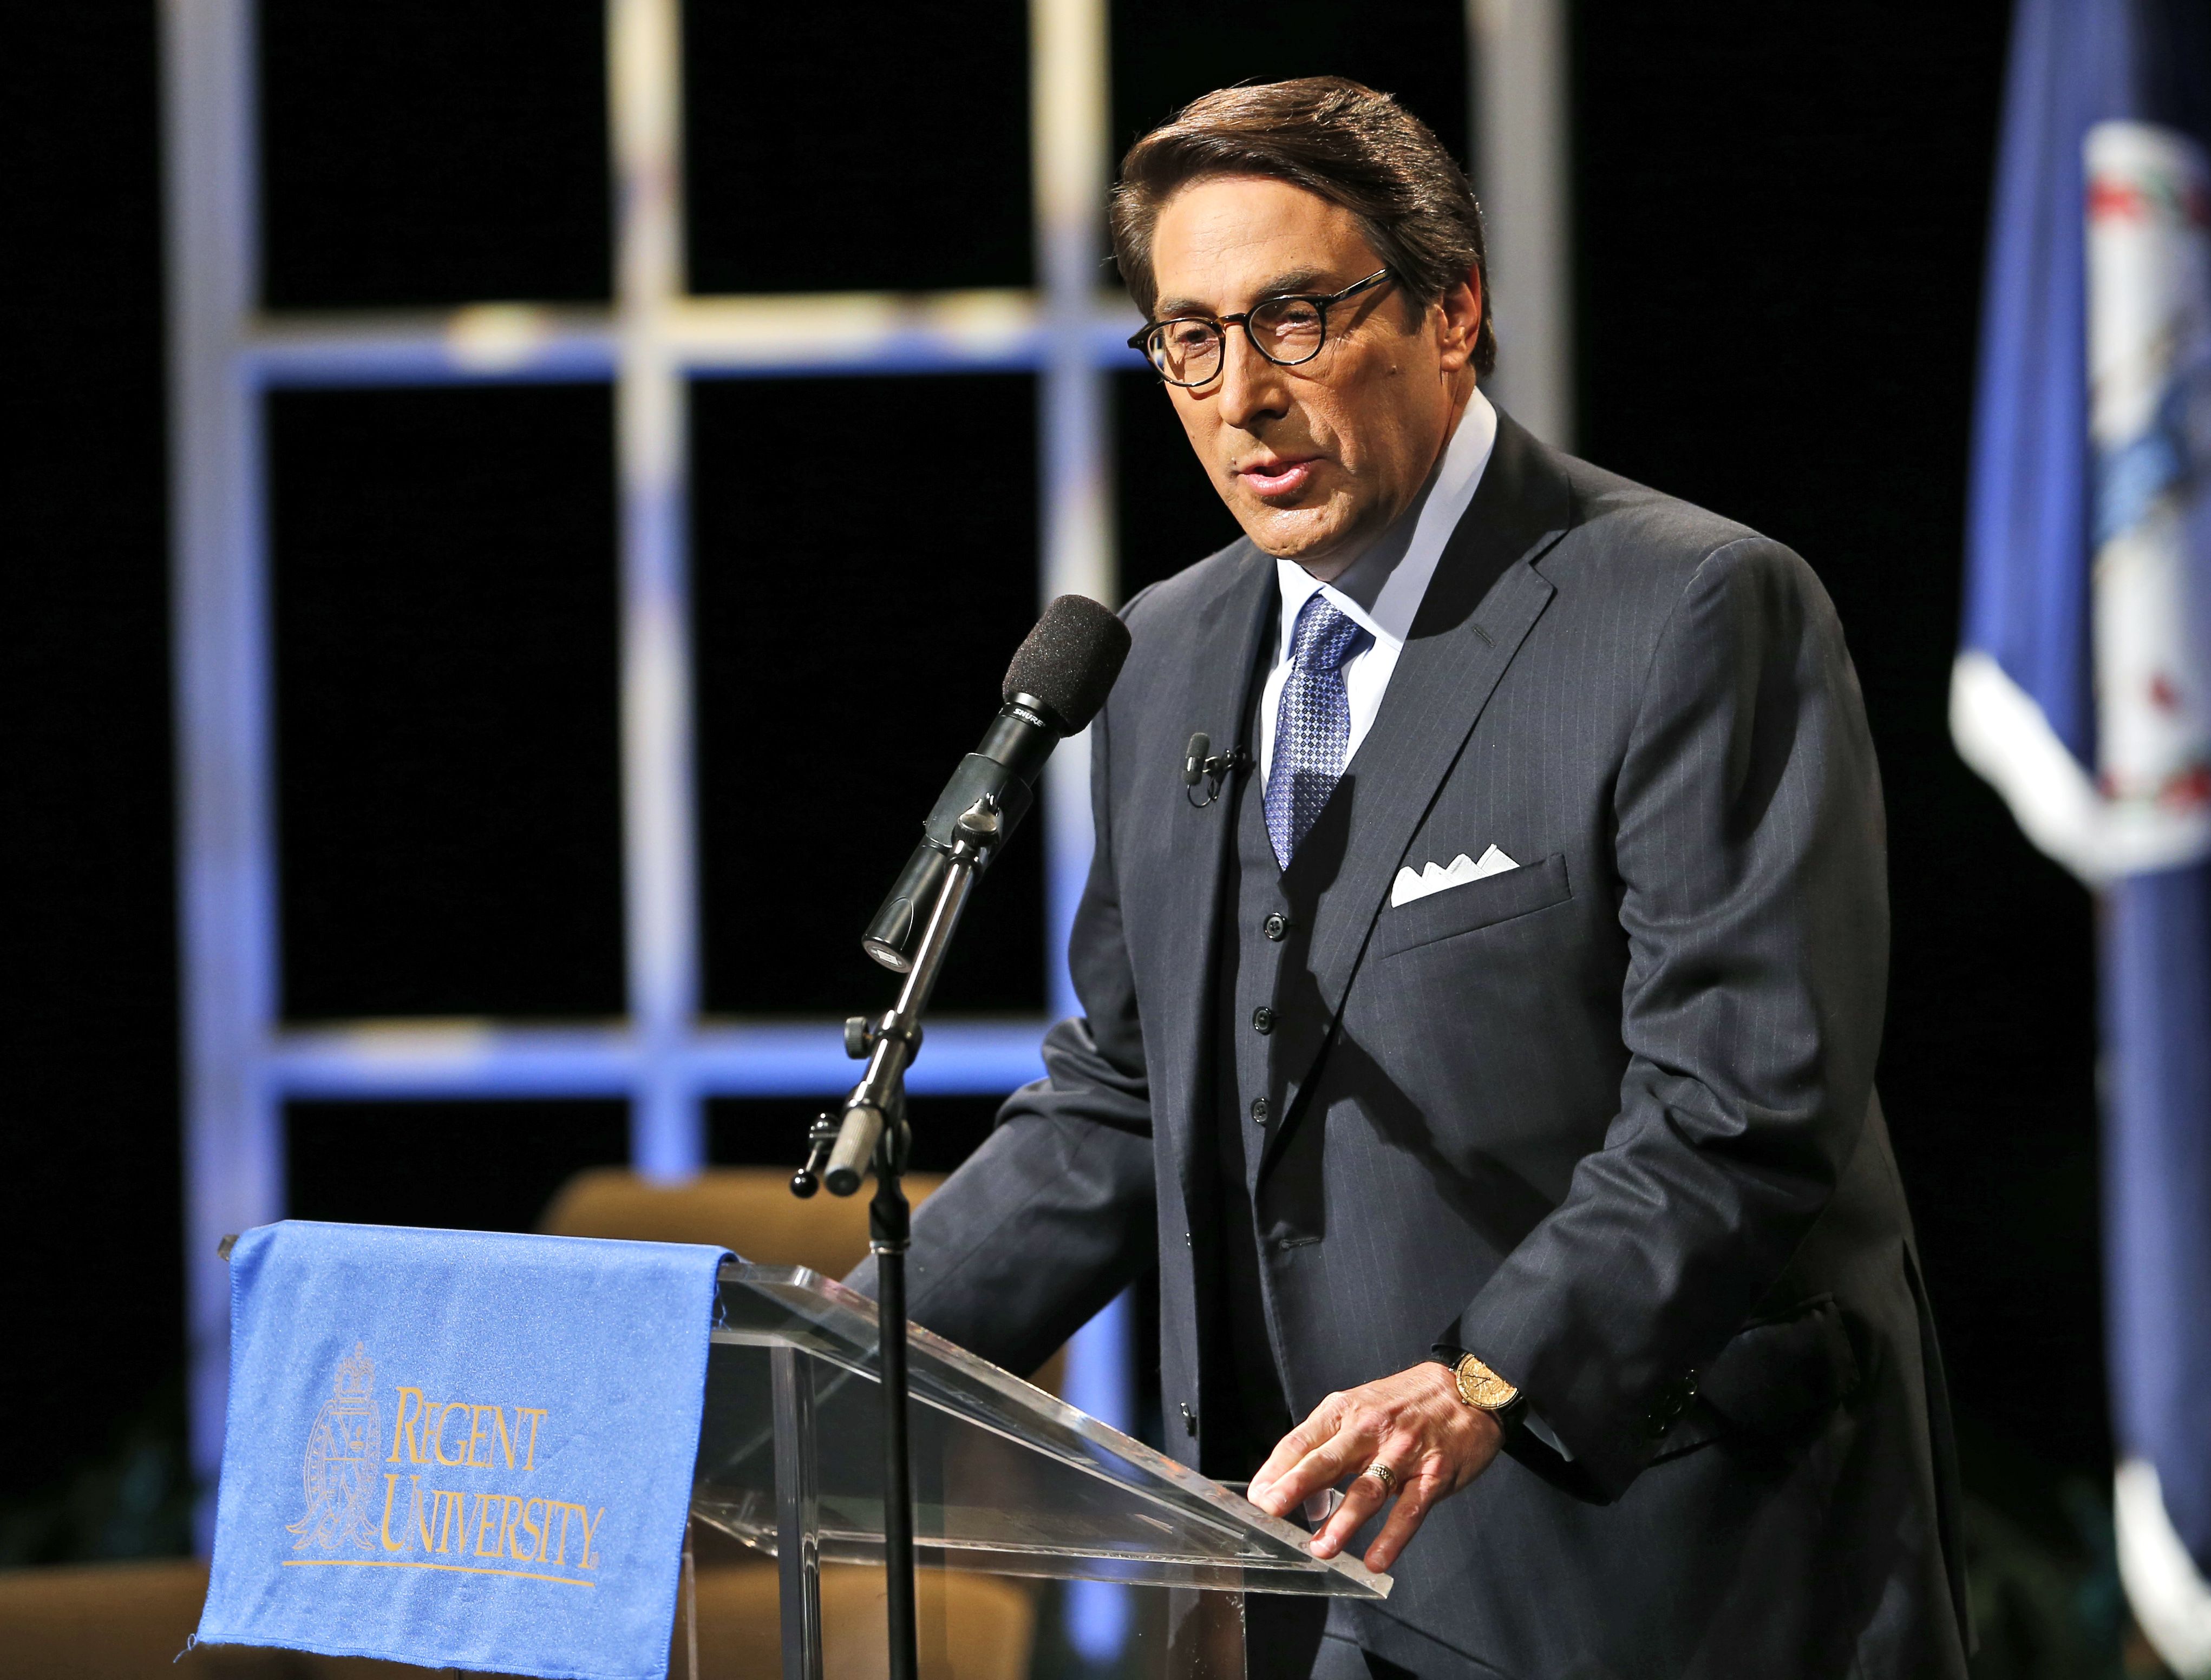 Jay Sekulow Jay Sekulow, Chief Counsel of the American Center for Law and Justice, introduces Republican presidential candidate former Florida Gov. Jeb Bush during a Presidential candidate forum with Rev. Pat Robertson, right, at Regent University in Virginia Beach, Va
                      Jay Sekulow, Virginia Beach, USA (Steve Helber—AP/REX/Shutterstock)